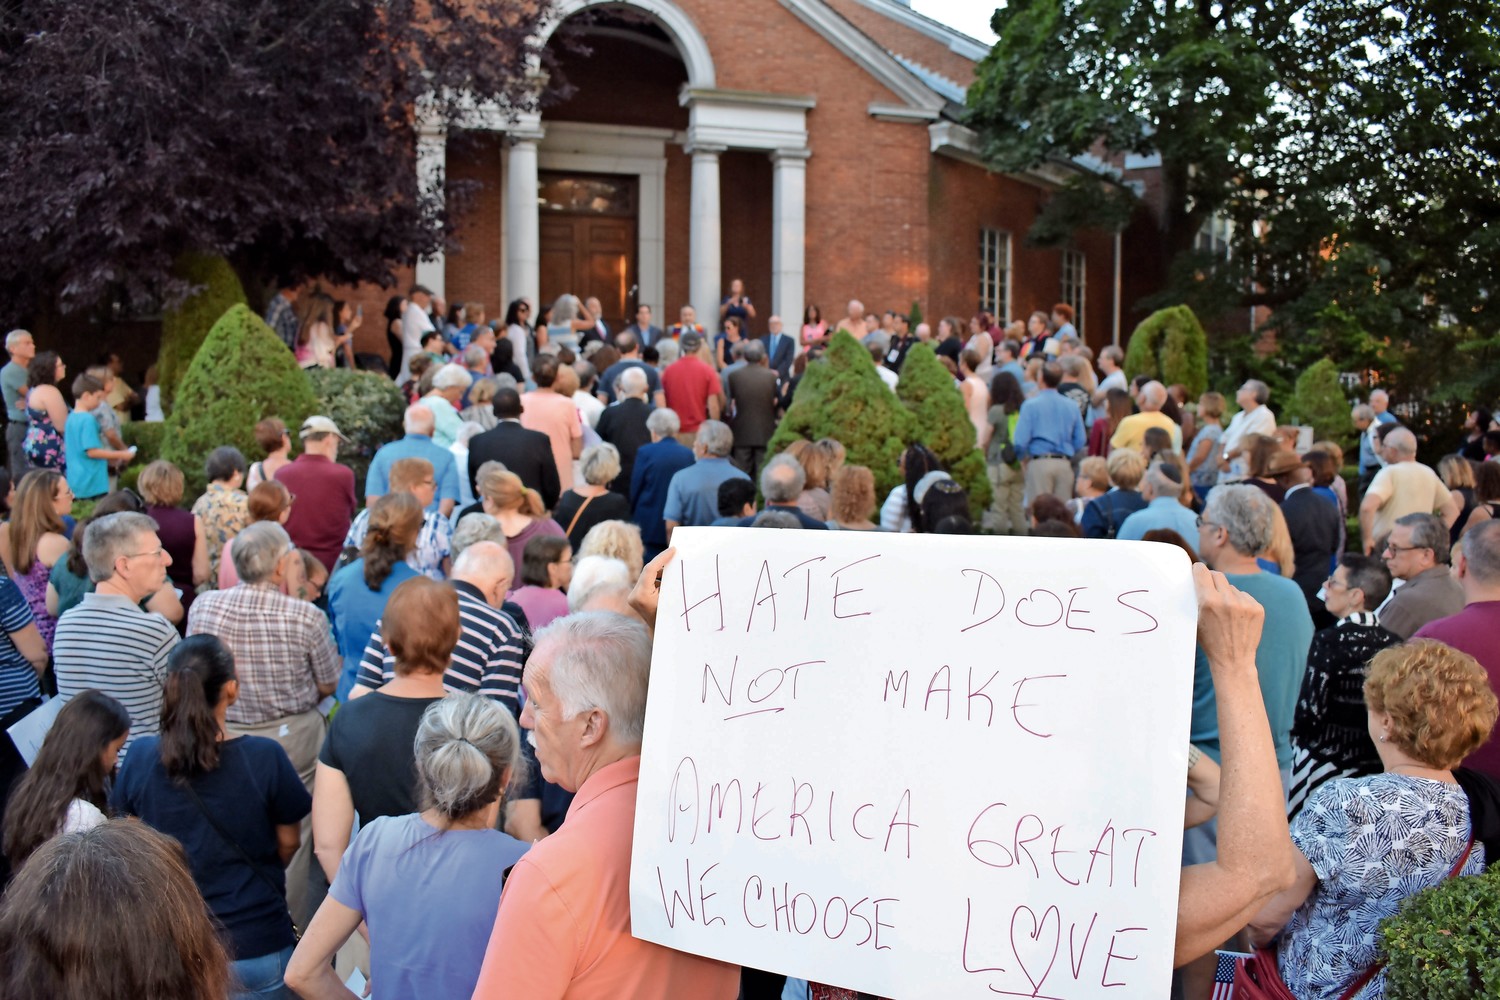 Residents gathered at Central Synagogue-Beth Emeth a year ago this week to denounce hatred in response to violence that grew out of a “Unite the Right” protest in Charlottesville, Va.